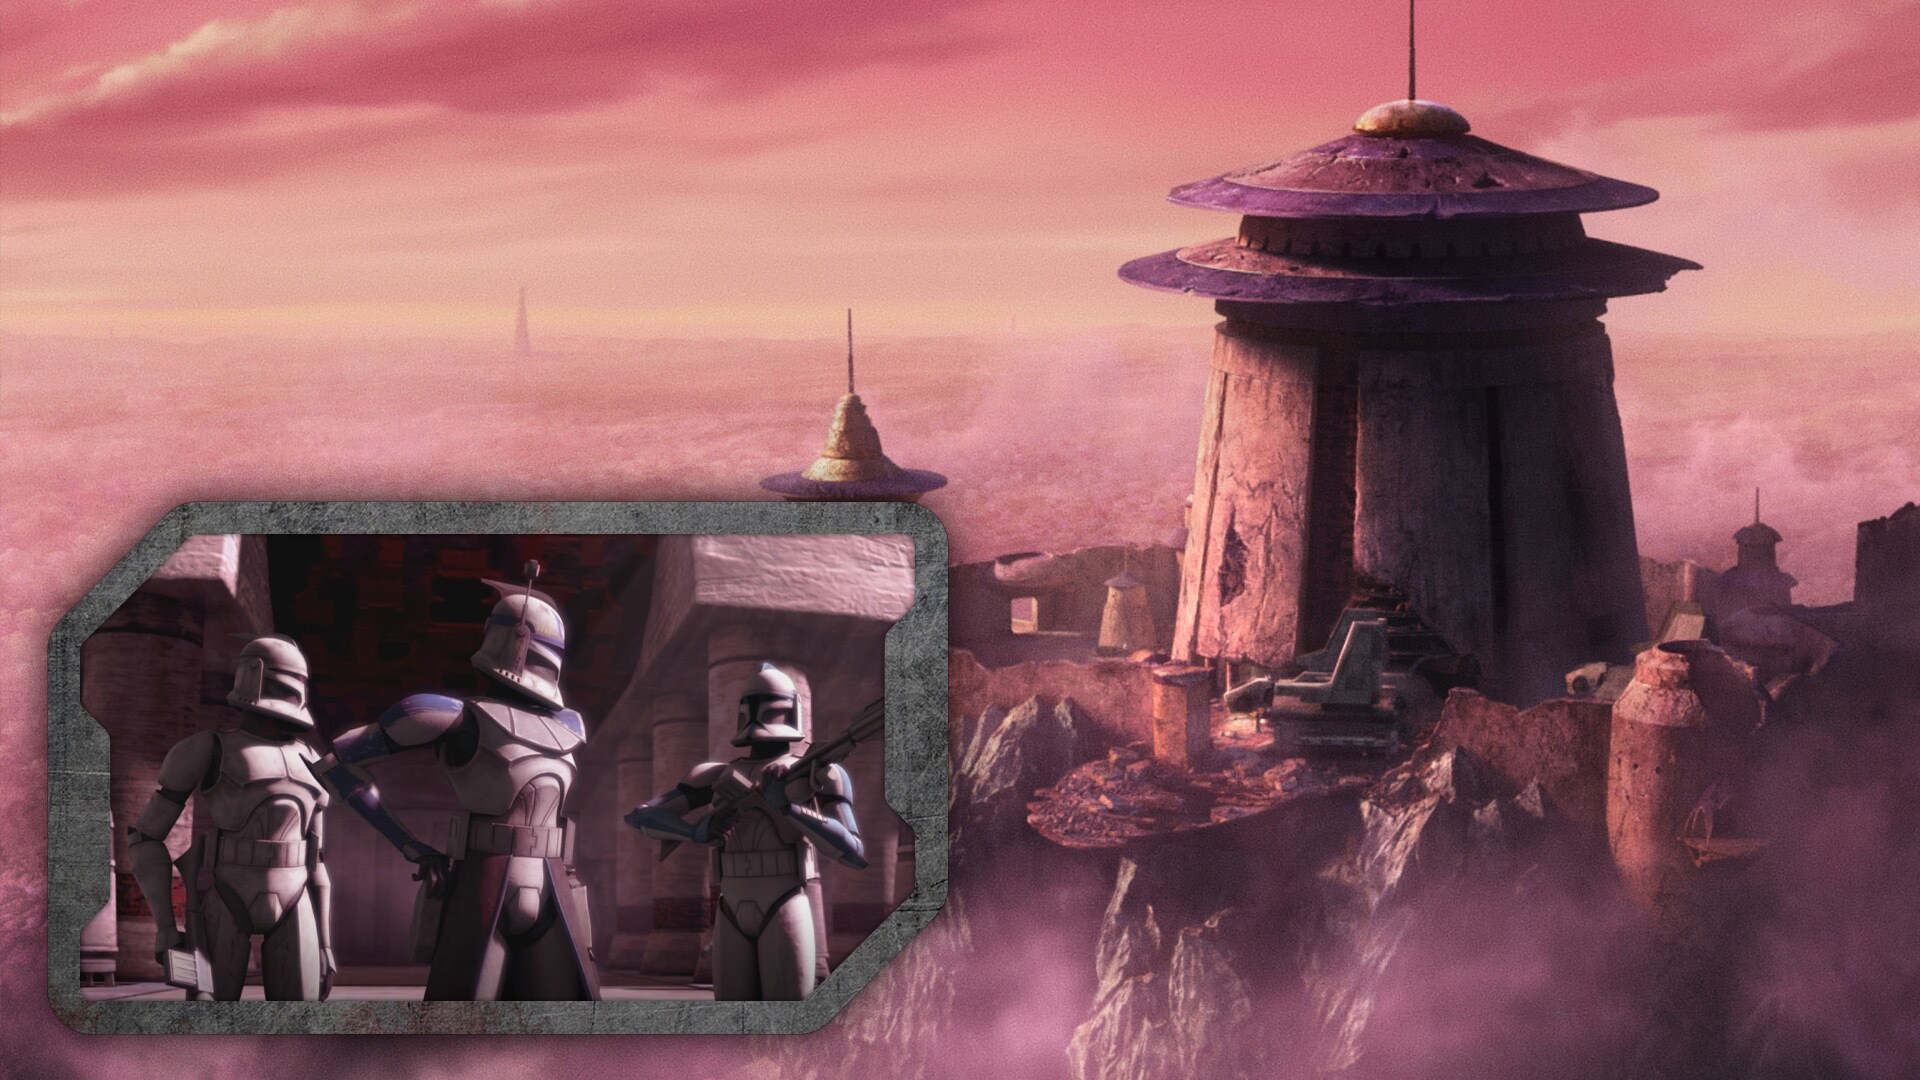 The Teth Monastery location that first appeared in the Star Wars: The Clone Wars movie (2008) has...